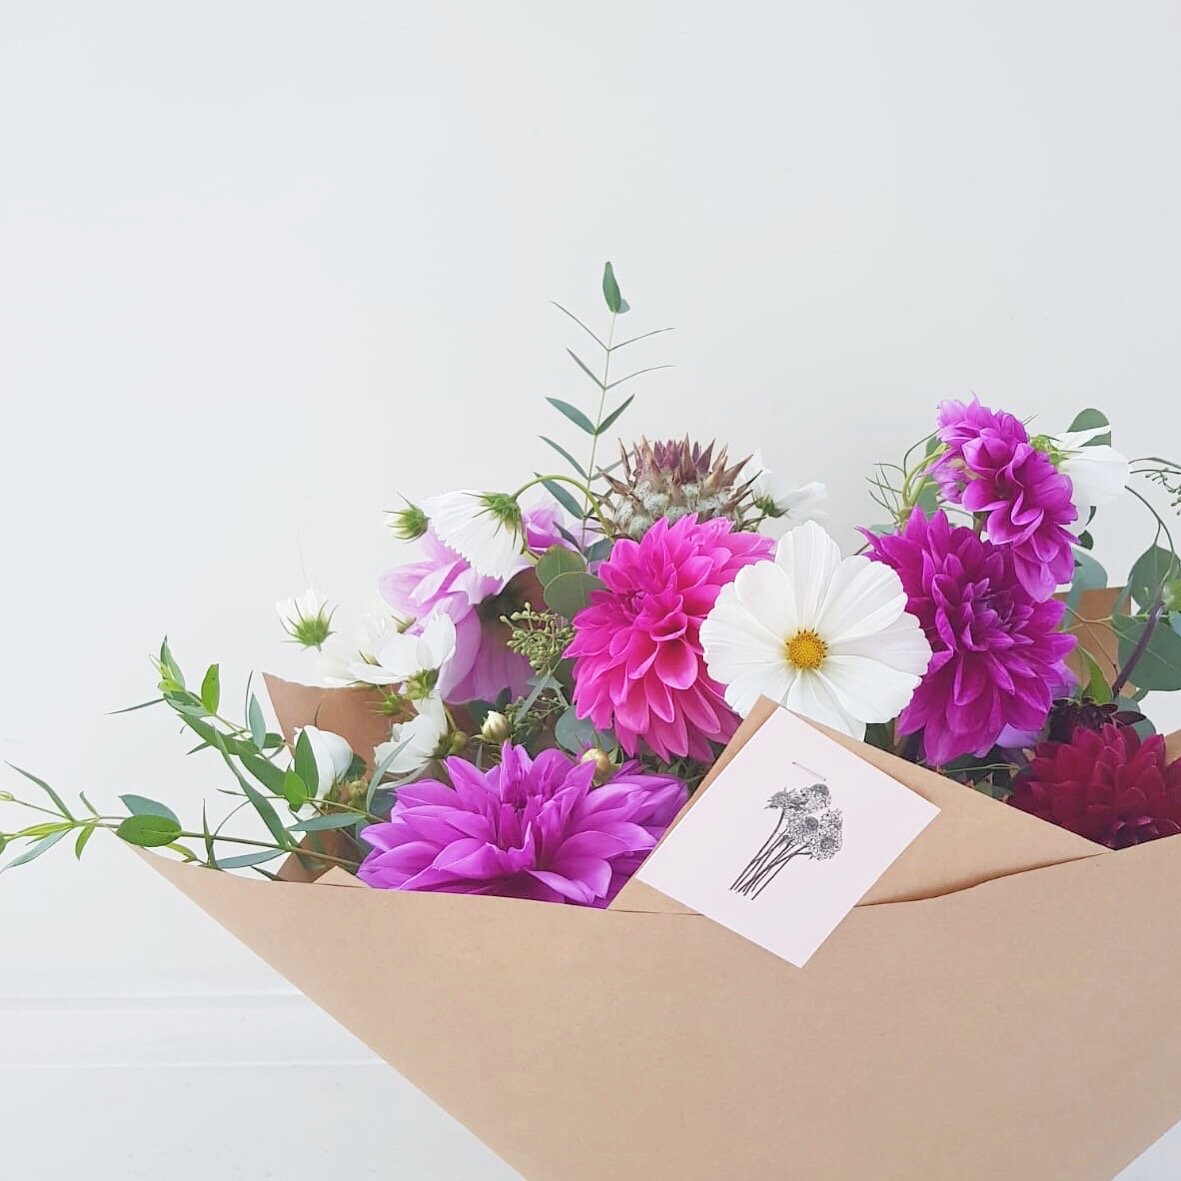 Subscription flowers - August 2019 